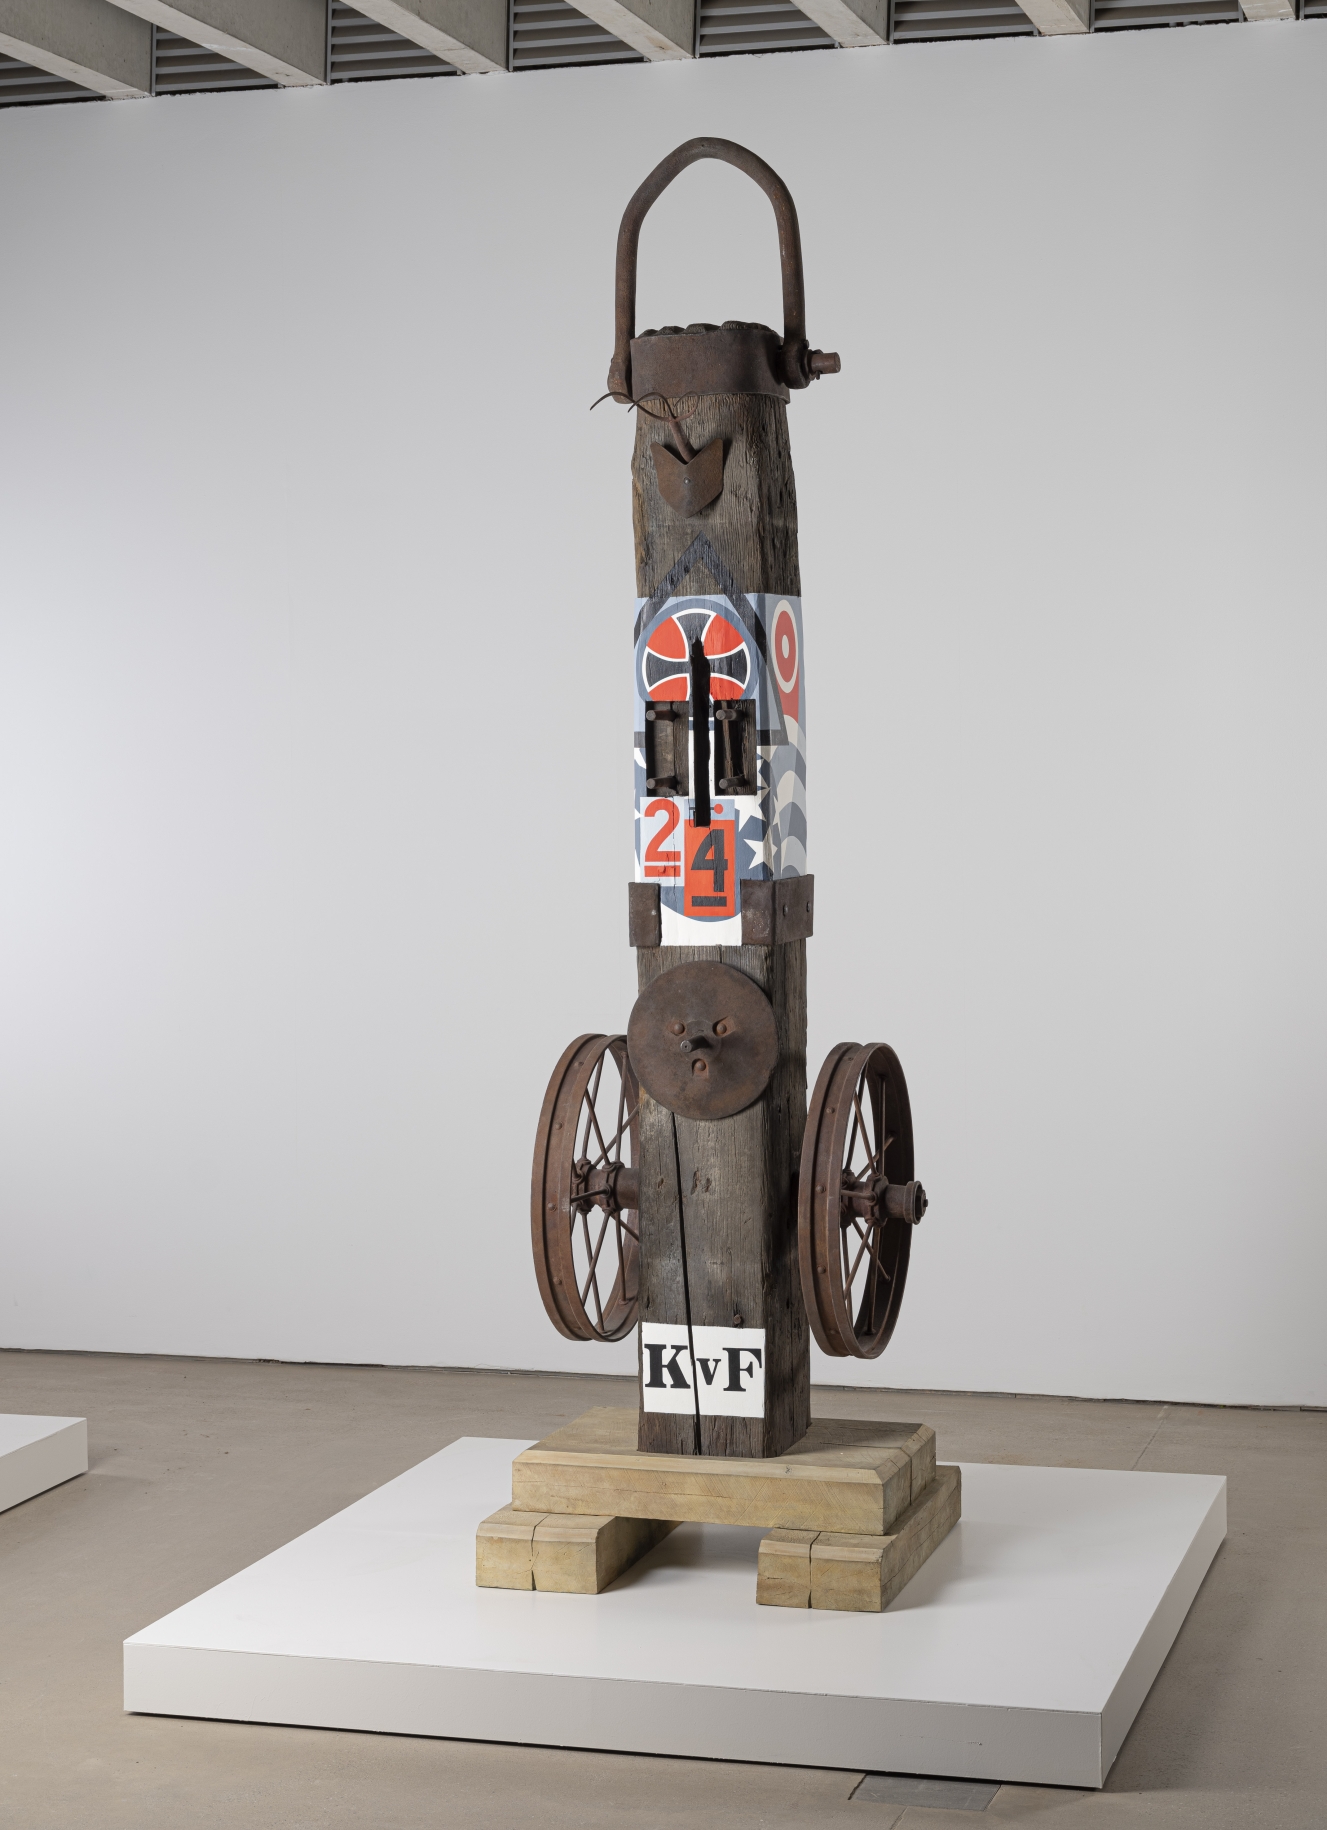 A 138 1/8 by 38 9/16 by 45 1/16 inch painted bronze sculpture consisting of a beam on a base. The work's title, "KvF" appears in stenciled letters against a white ground. A wheel is affixed to the right and left sides of the sculpture. On the front of the sculpture, level with the top of the wheels, is a disk. Above this a section of the sculpture has been painted with red, blue, white, and black designs that include a cross, stars, and the numbers 2 and 4. At the top of the sculpture is a cap with a handle.